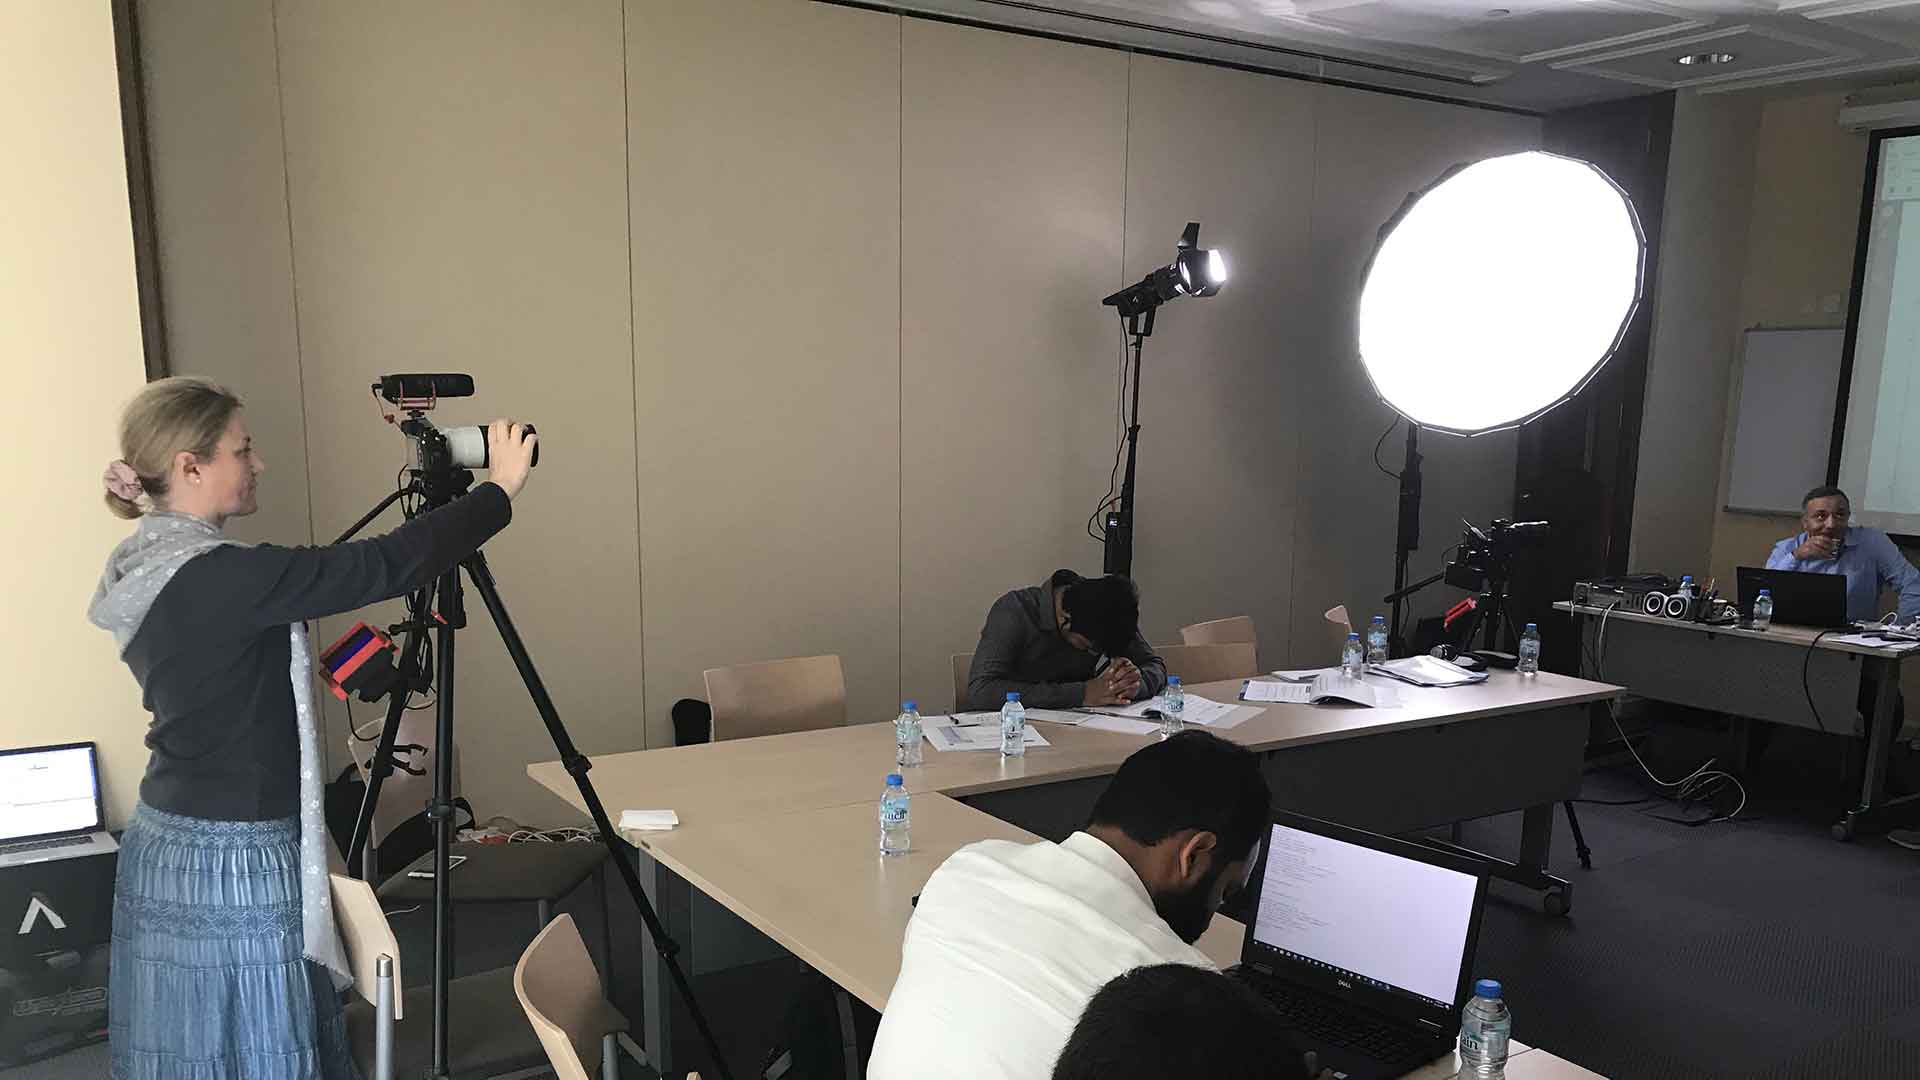 How To Make A Training Video - Tips For Staff - FIVE Pictures